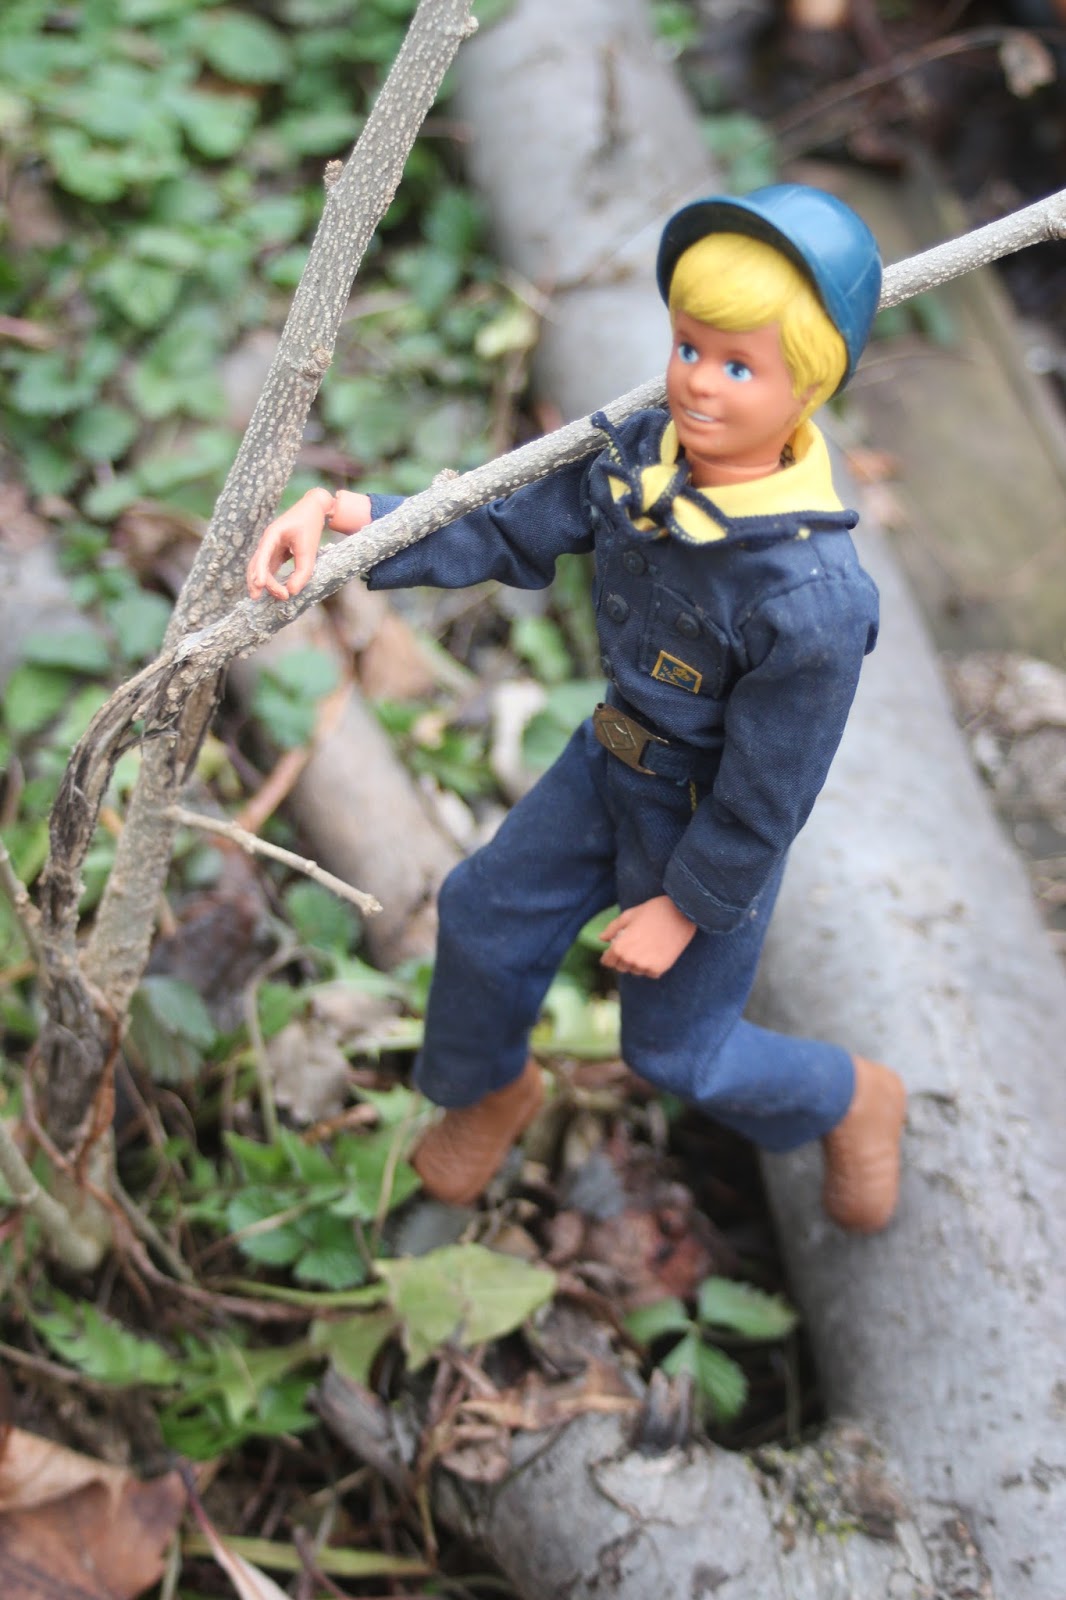 PLANET OF THE DOLLS: Doll-A-Day 2017 #17: Craig Cub Scout by Kenner